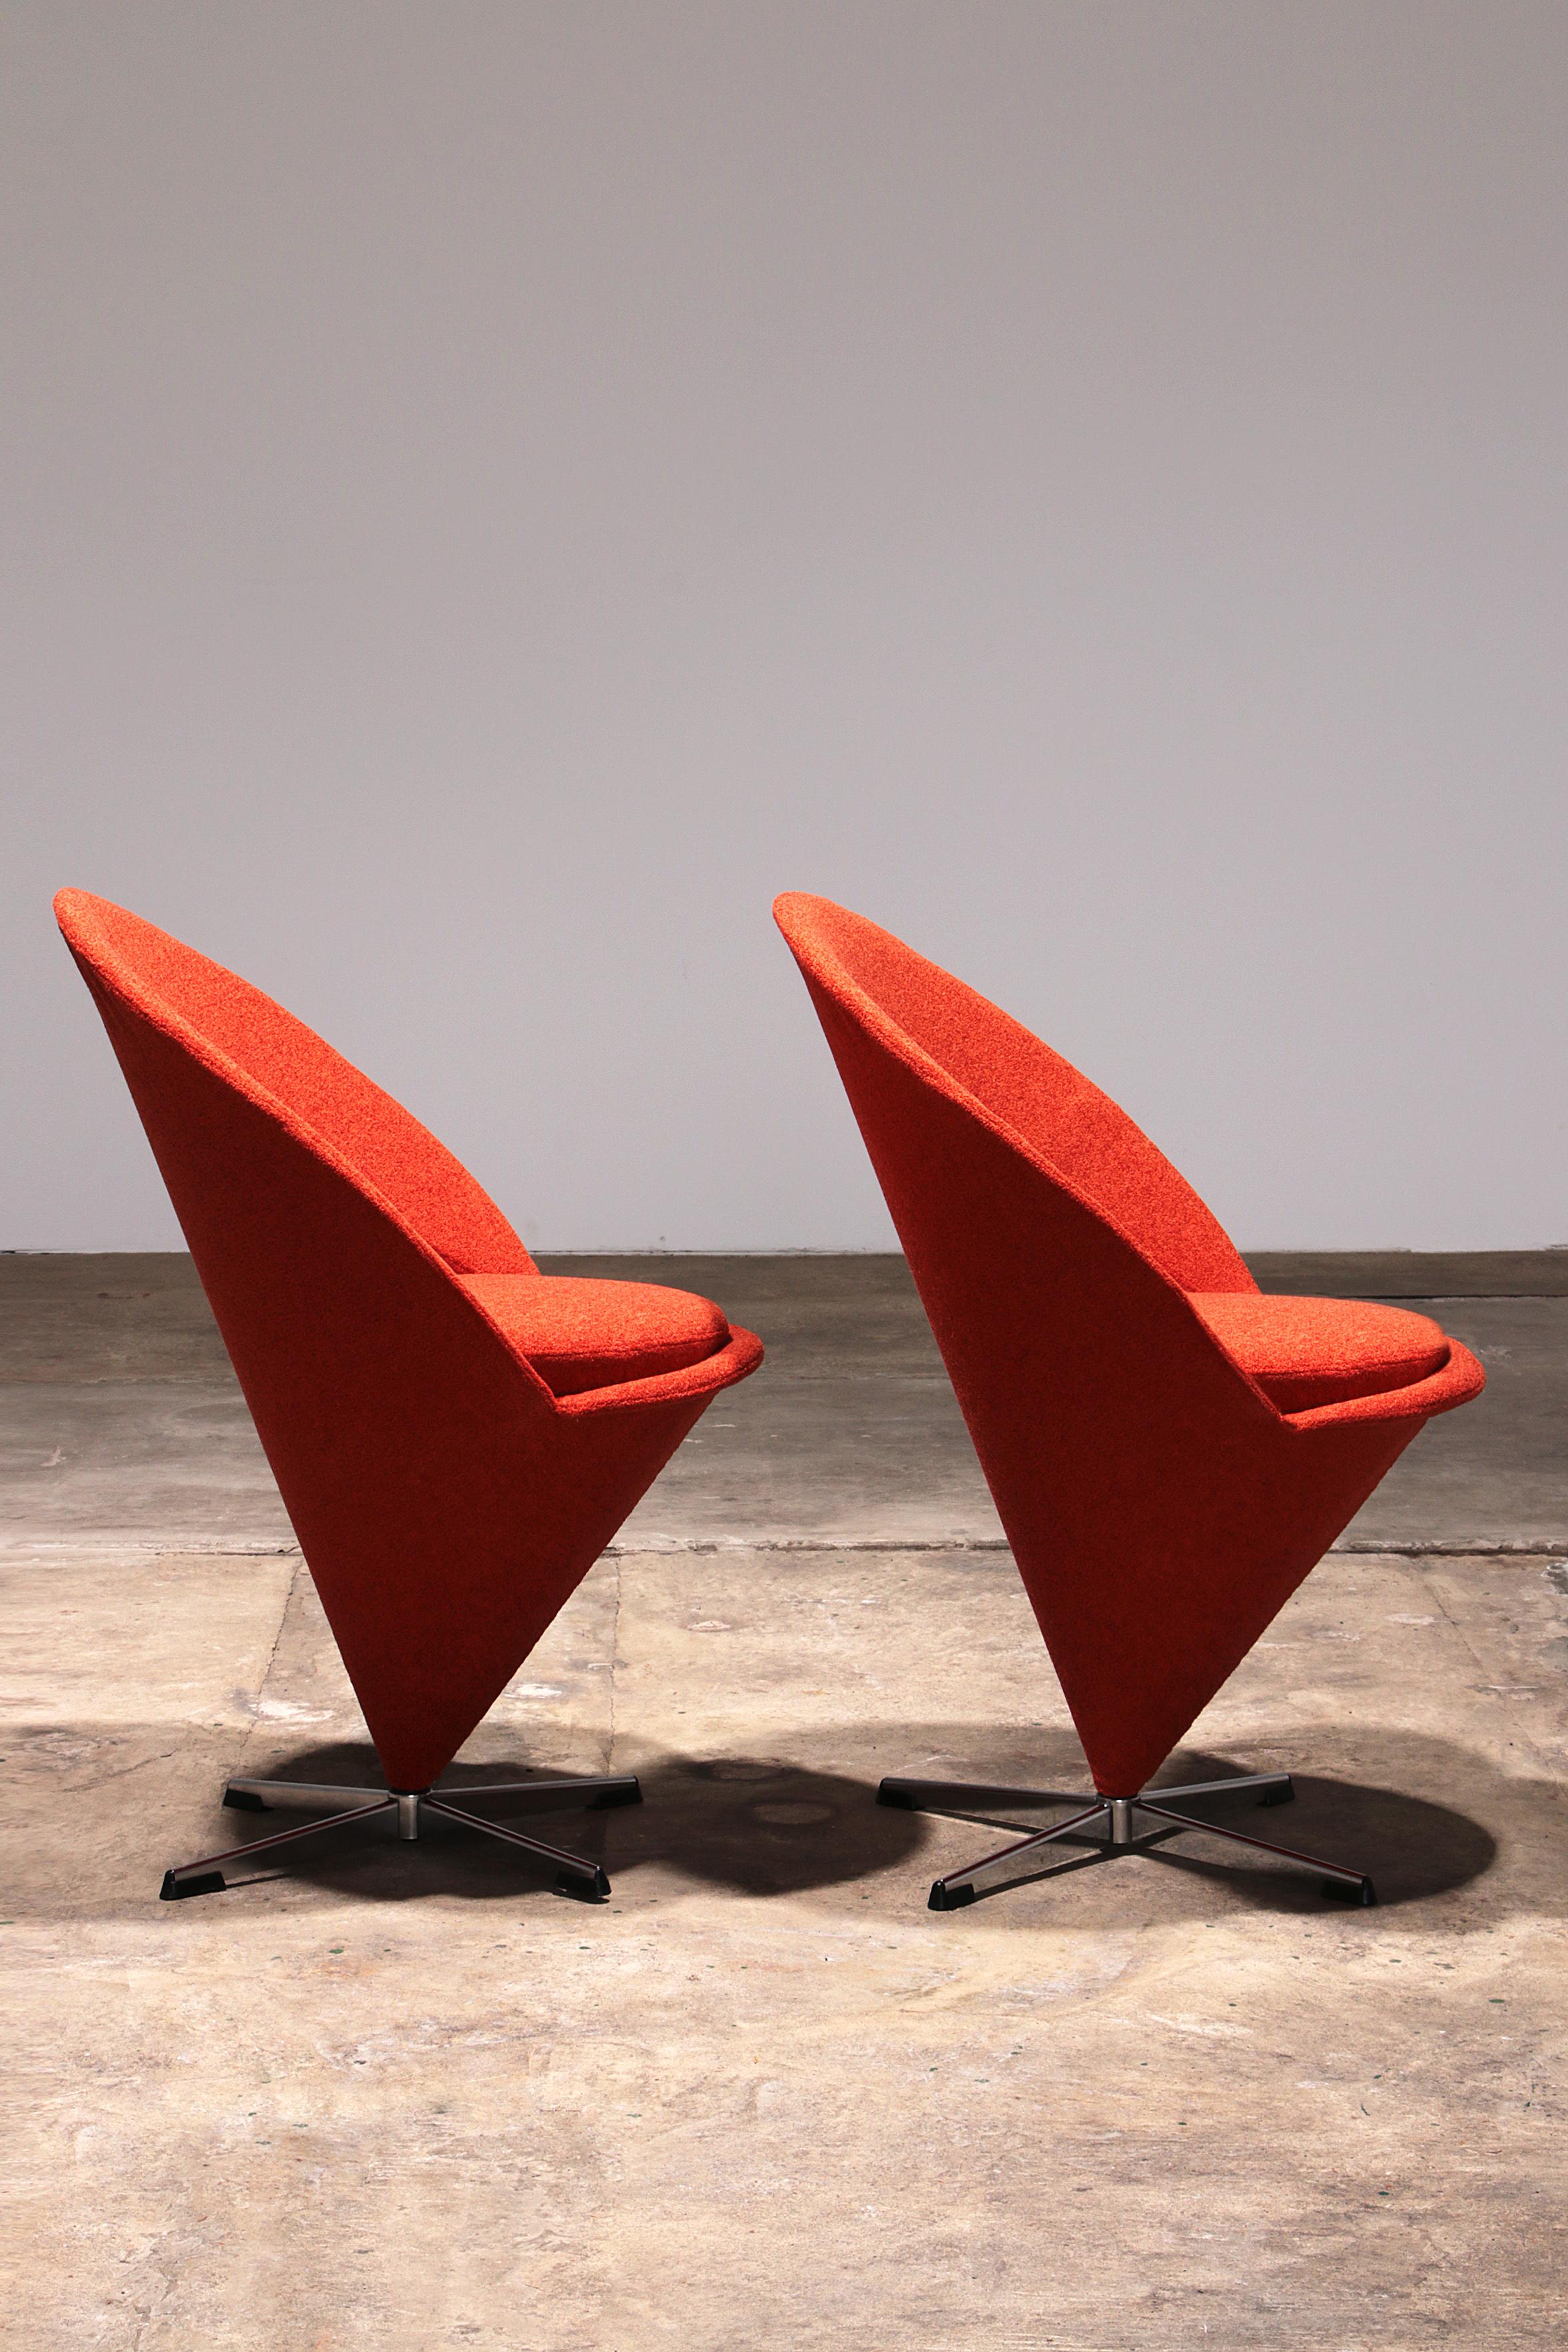 Fabric Verner Panton Model Cone K1 Chair from Timeless Design Classic